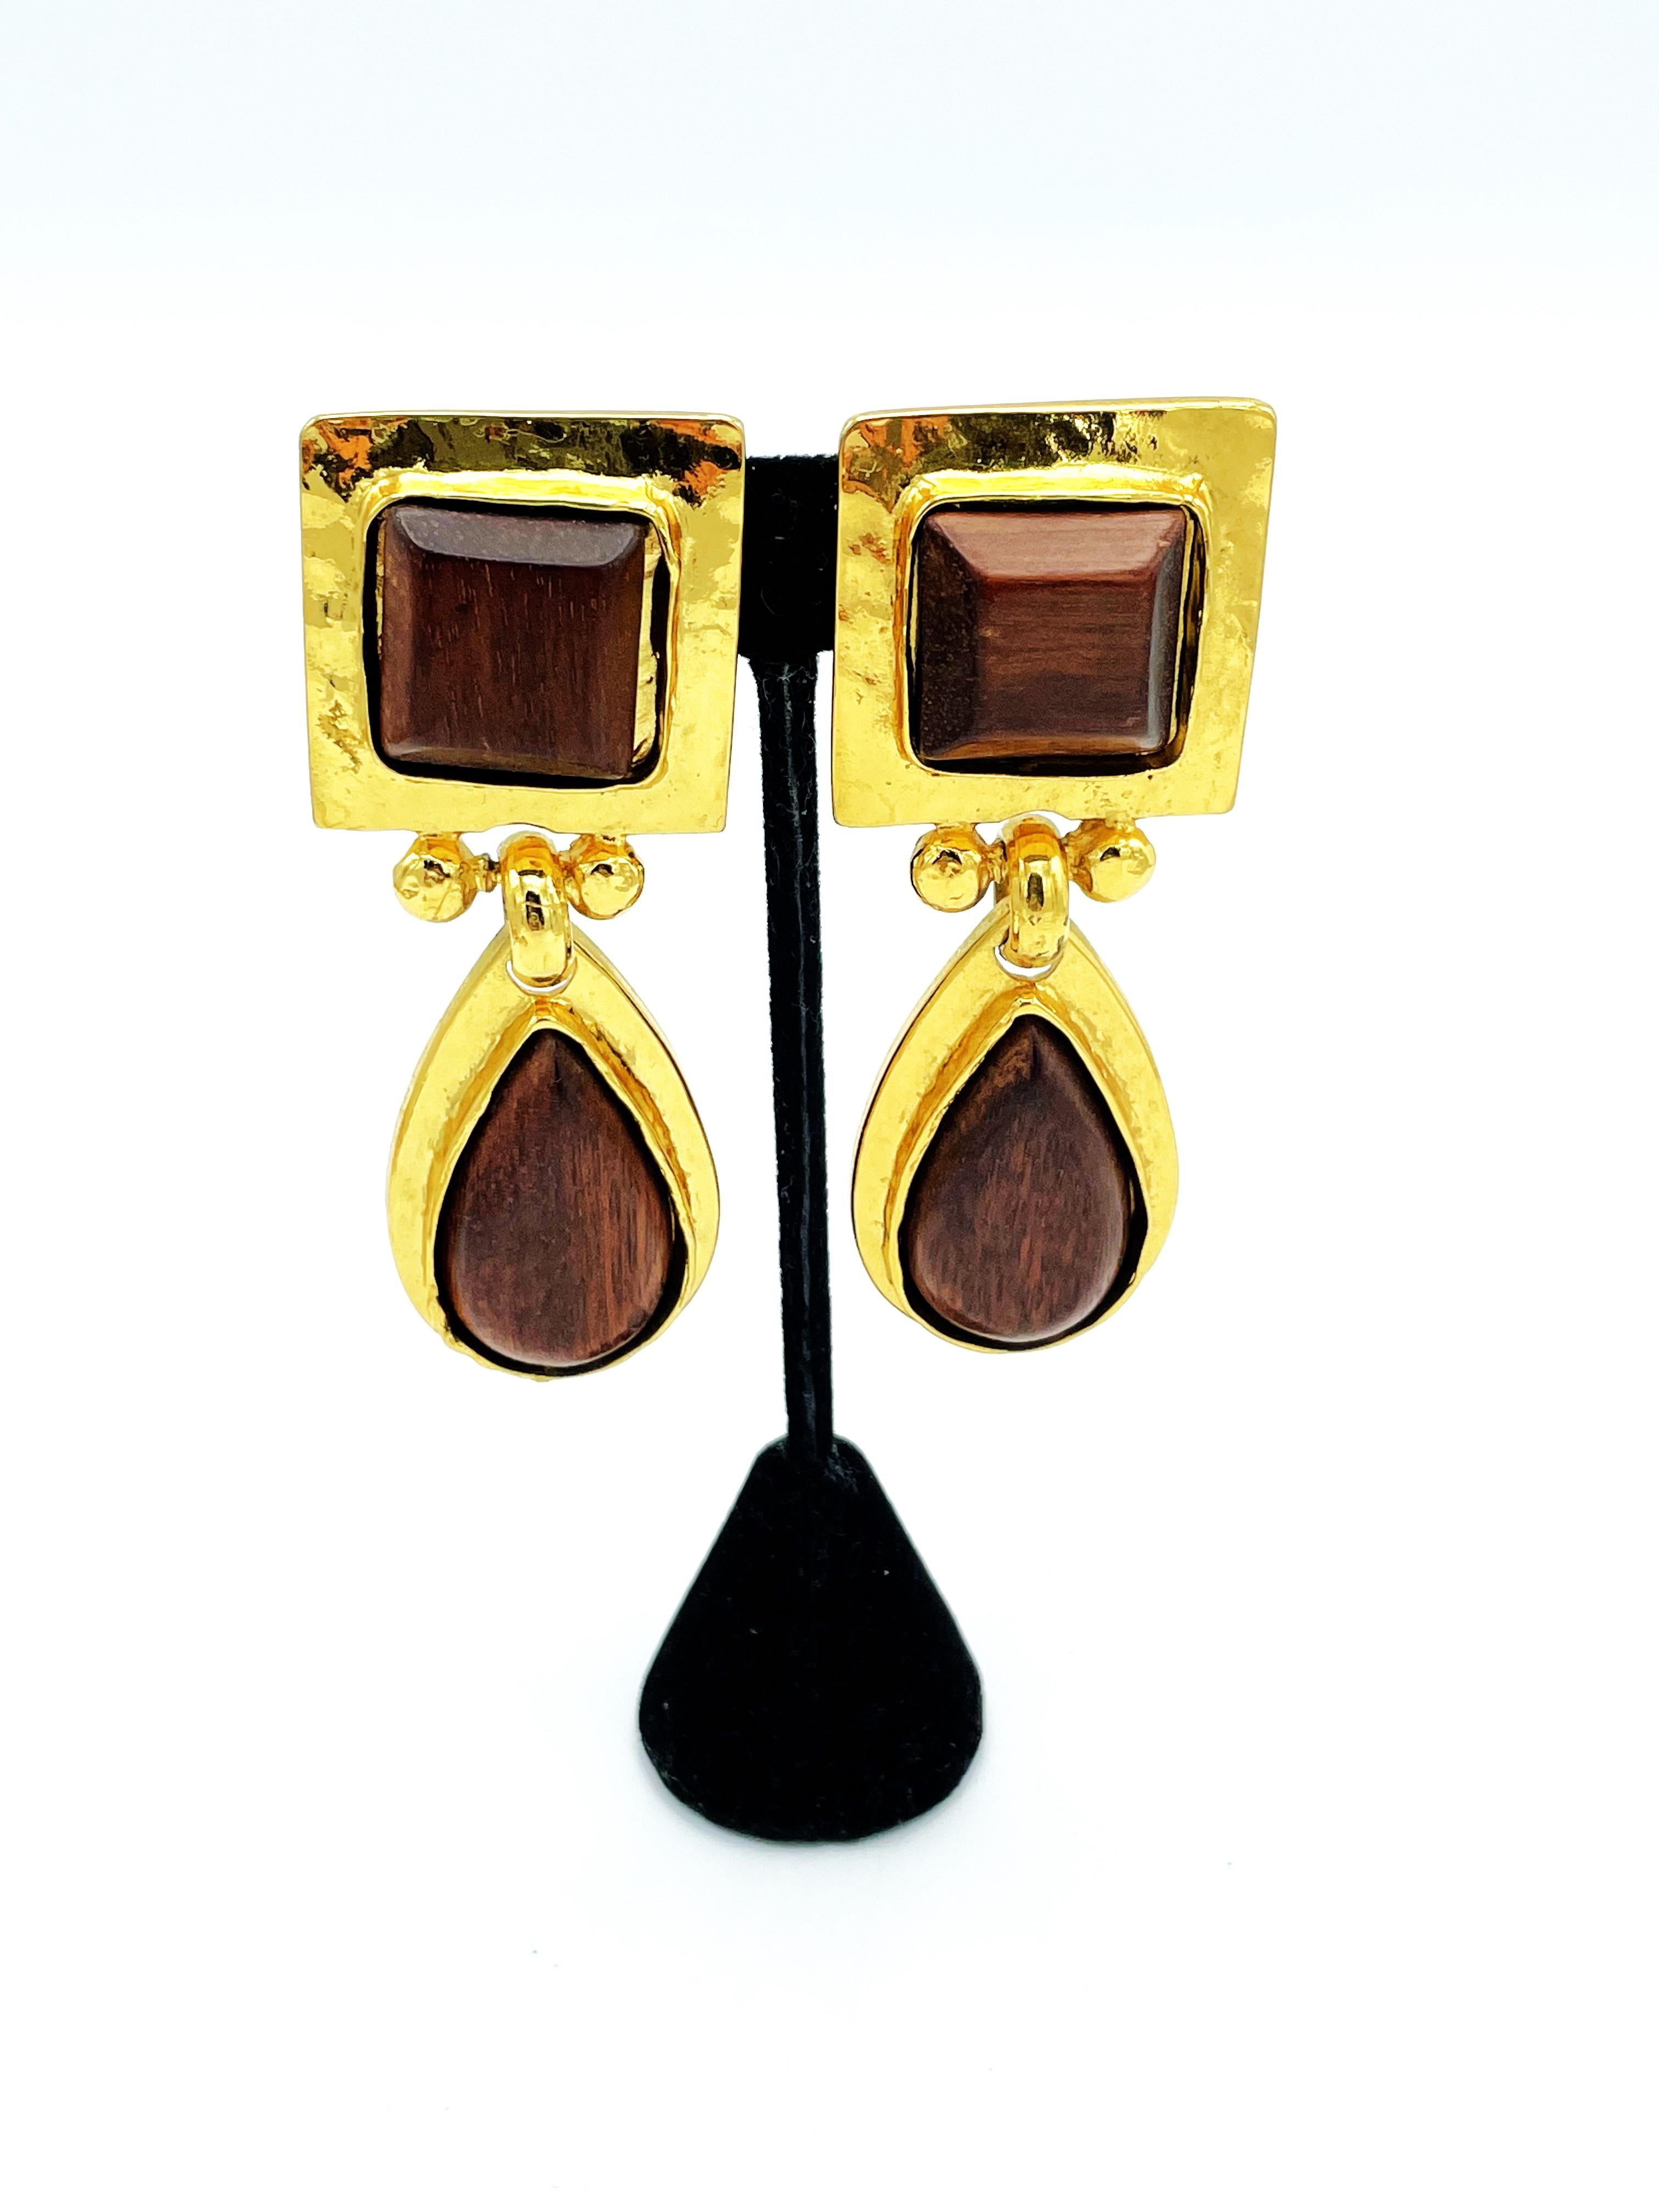 Art Deco Clip-on earring by Eduard Rambaud Paris, 2 parts with wood filling, gilded  For Sale